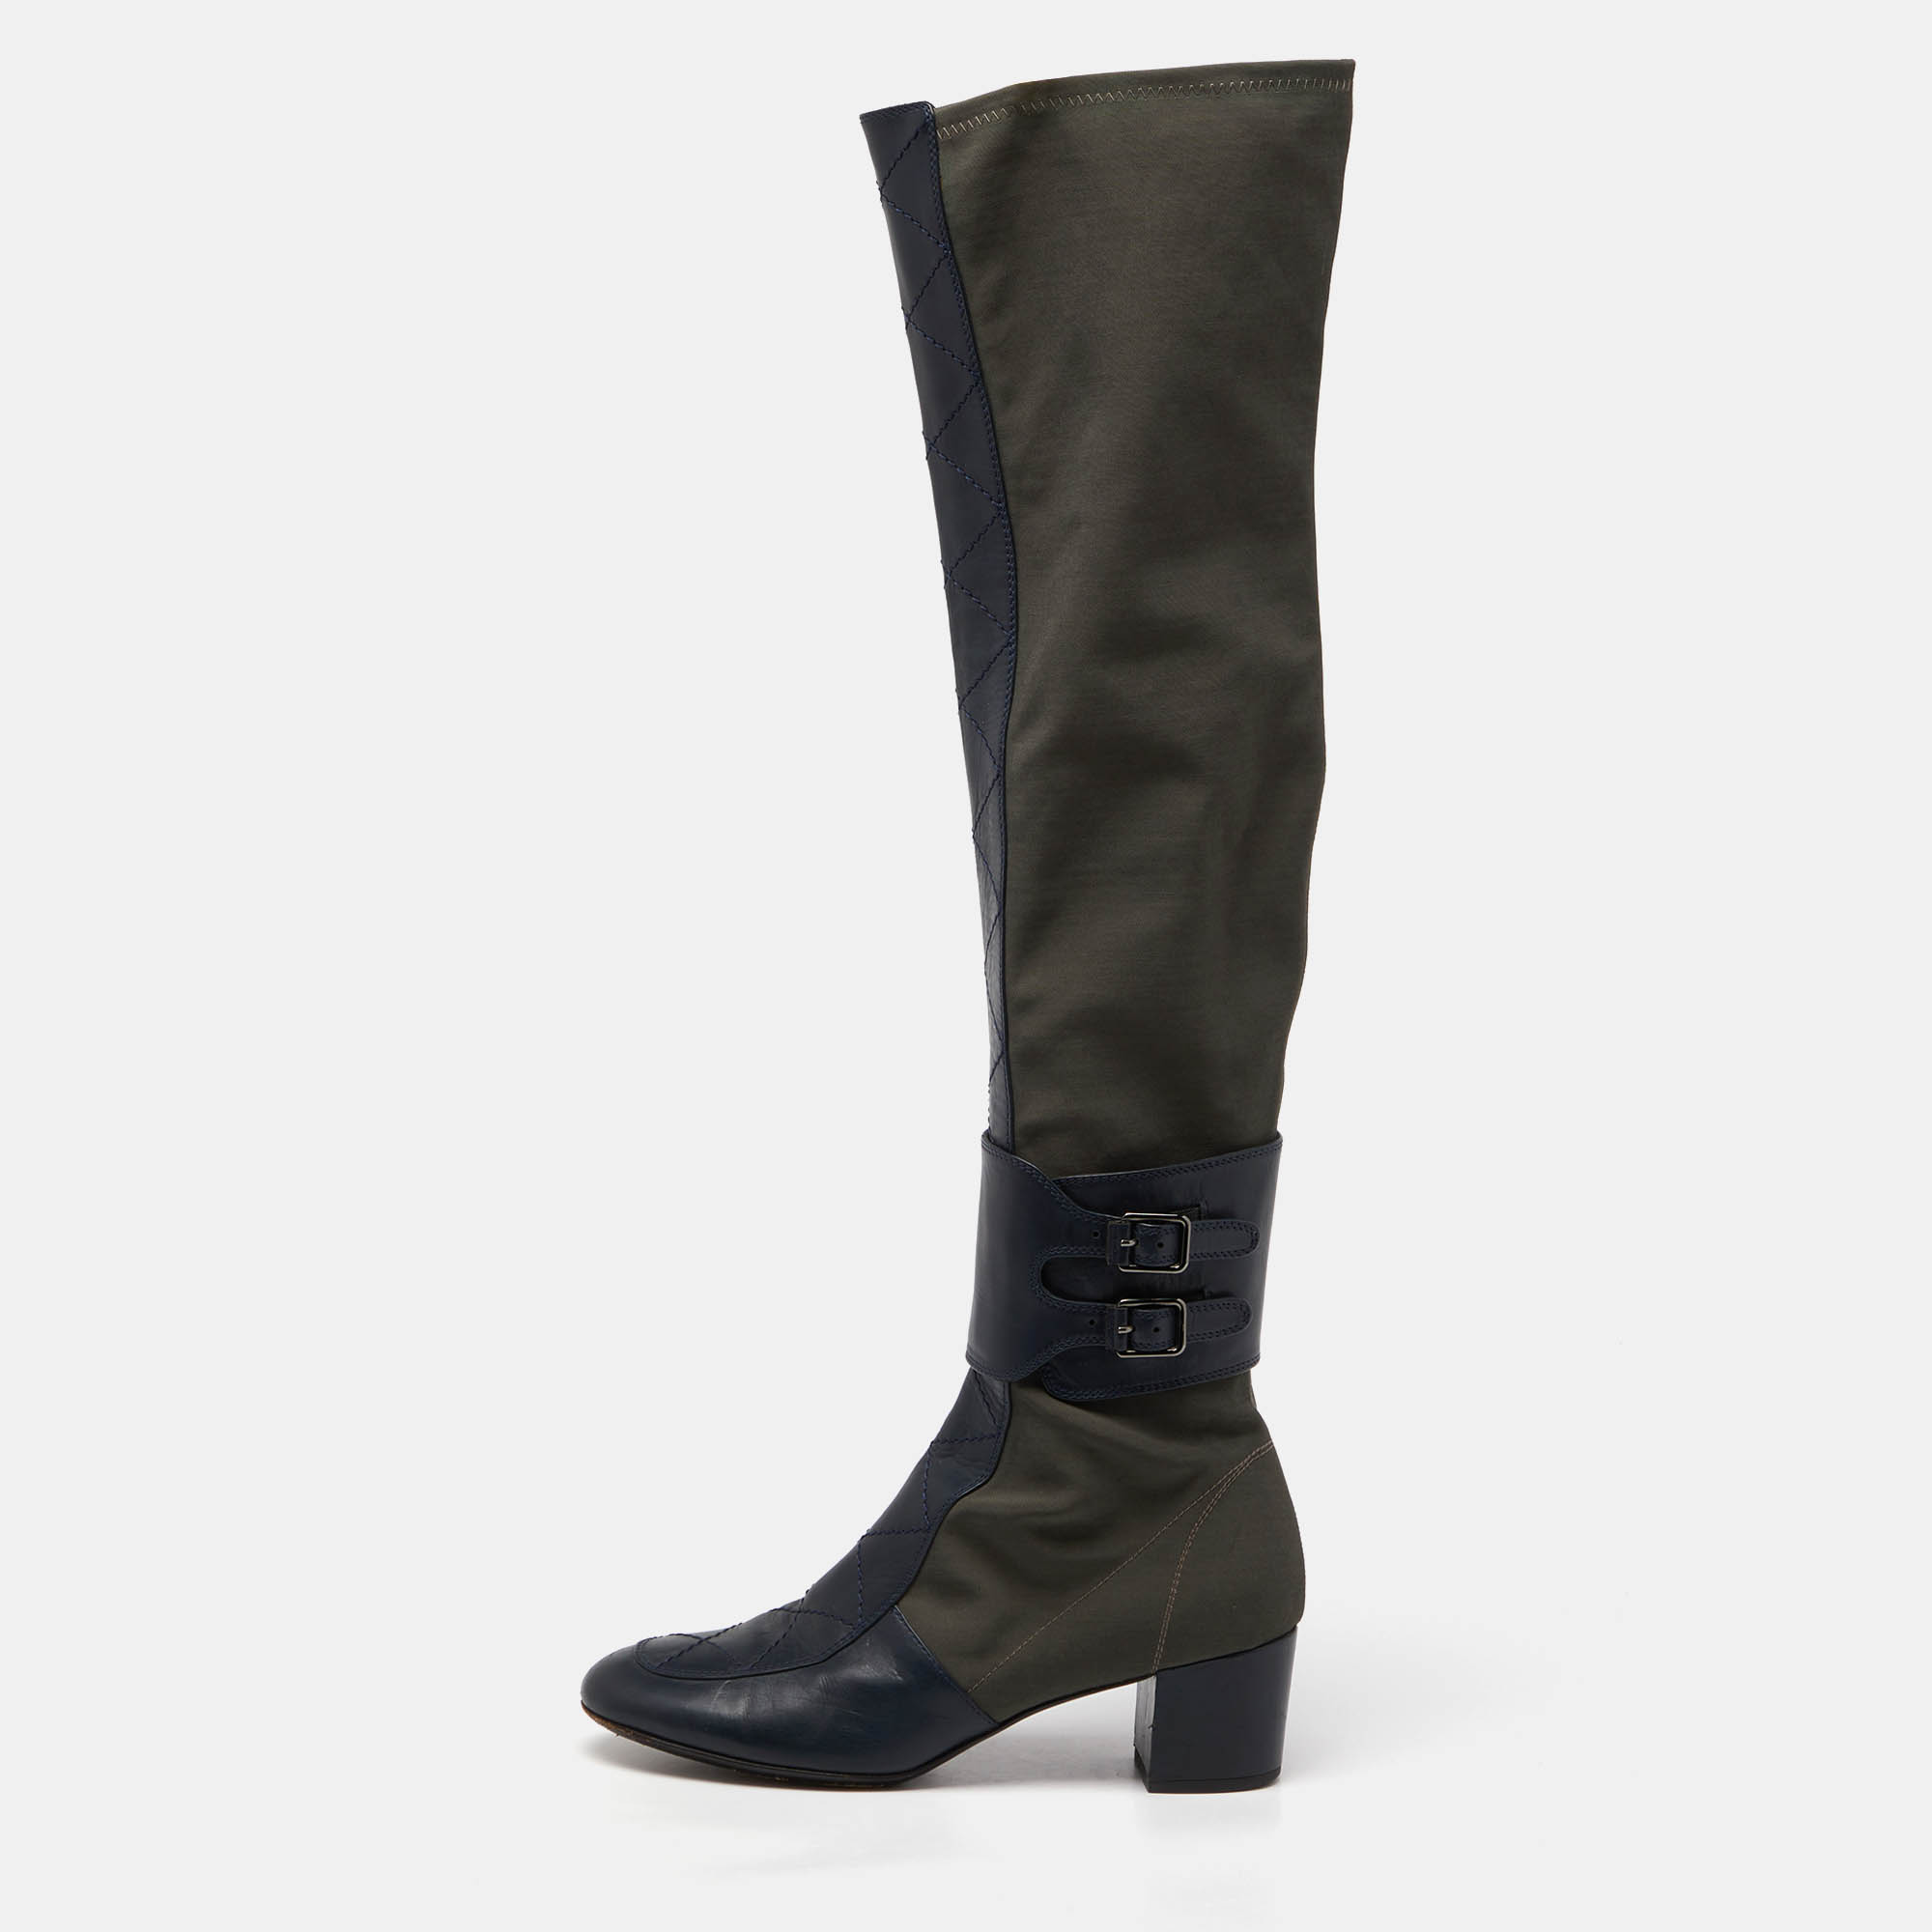 

Laurence Dacade Blue/Olive Green Fabric and Quilted Leather Over The Knee Length Boots Size